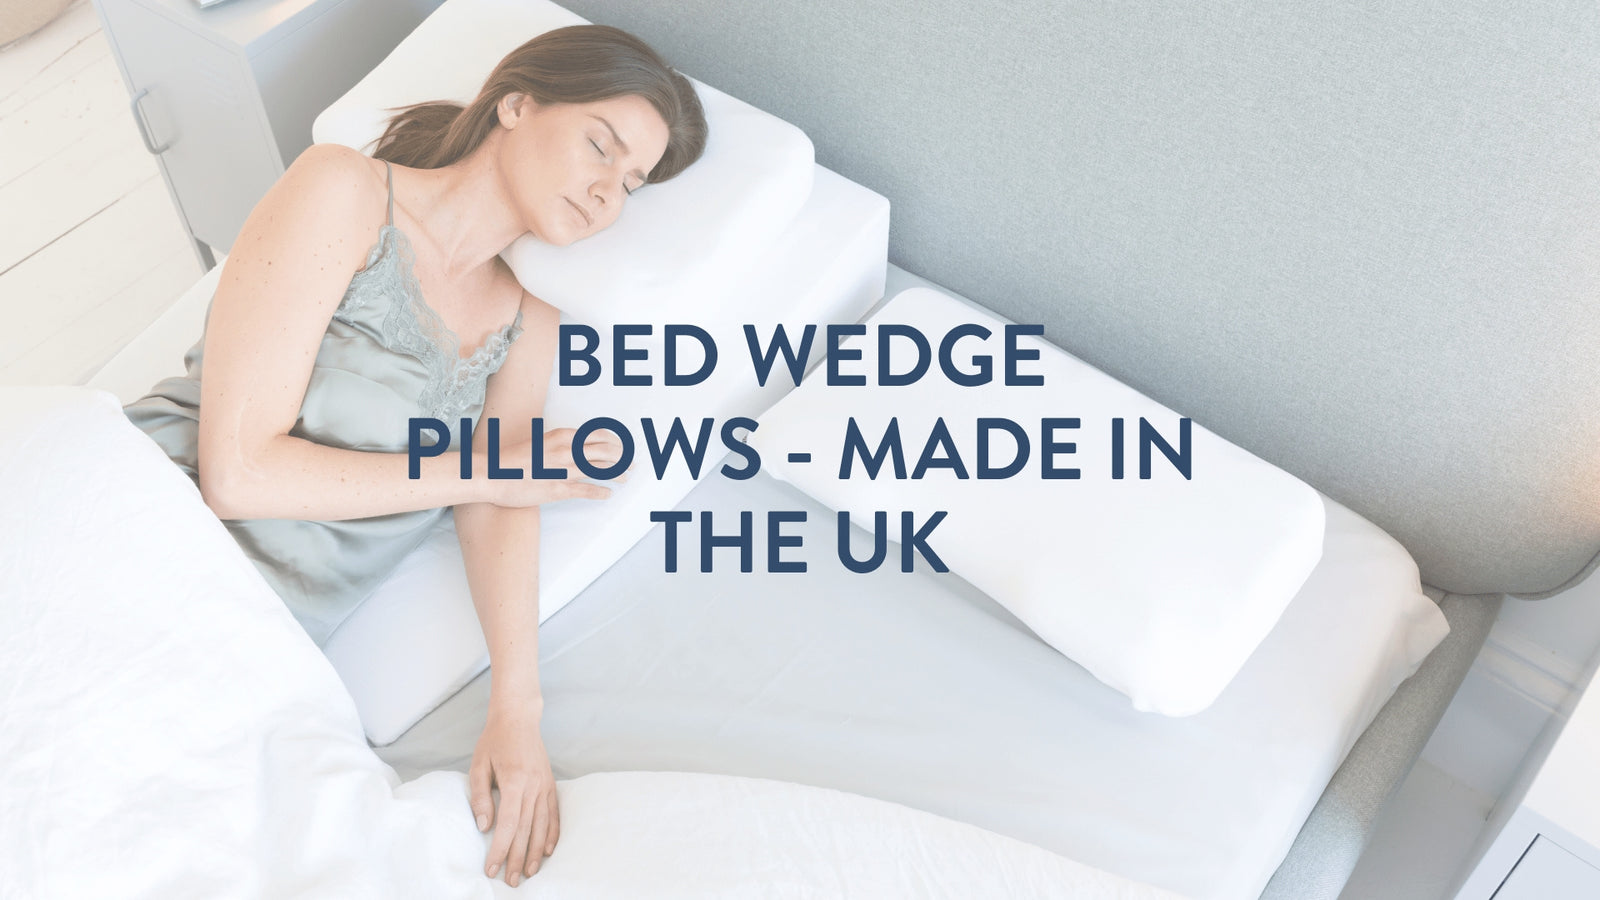 bed wedge pillows made in the UK which pillow is best